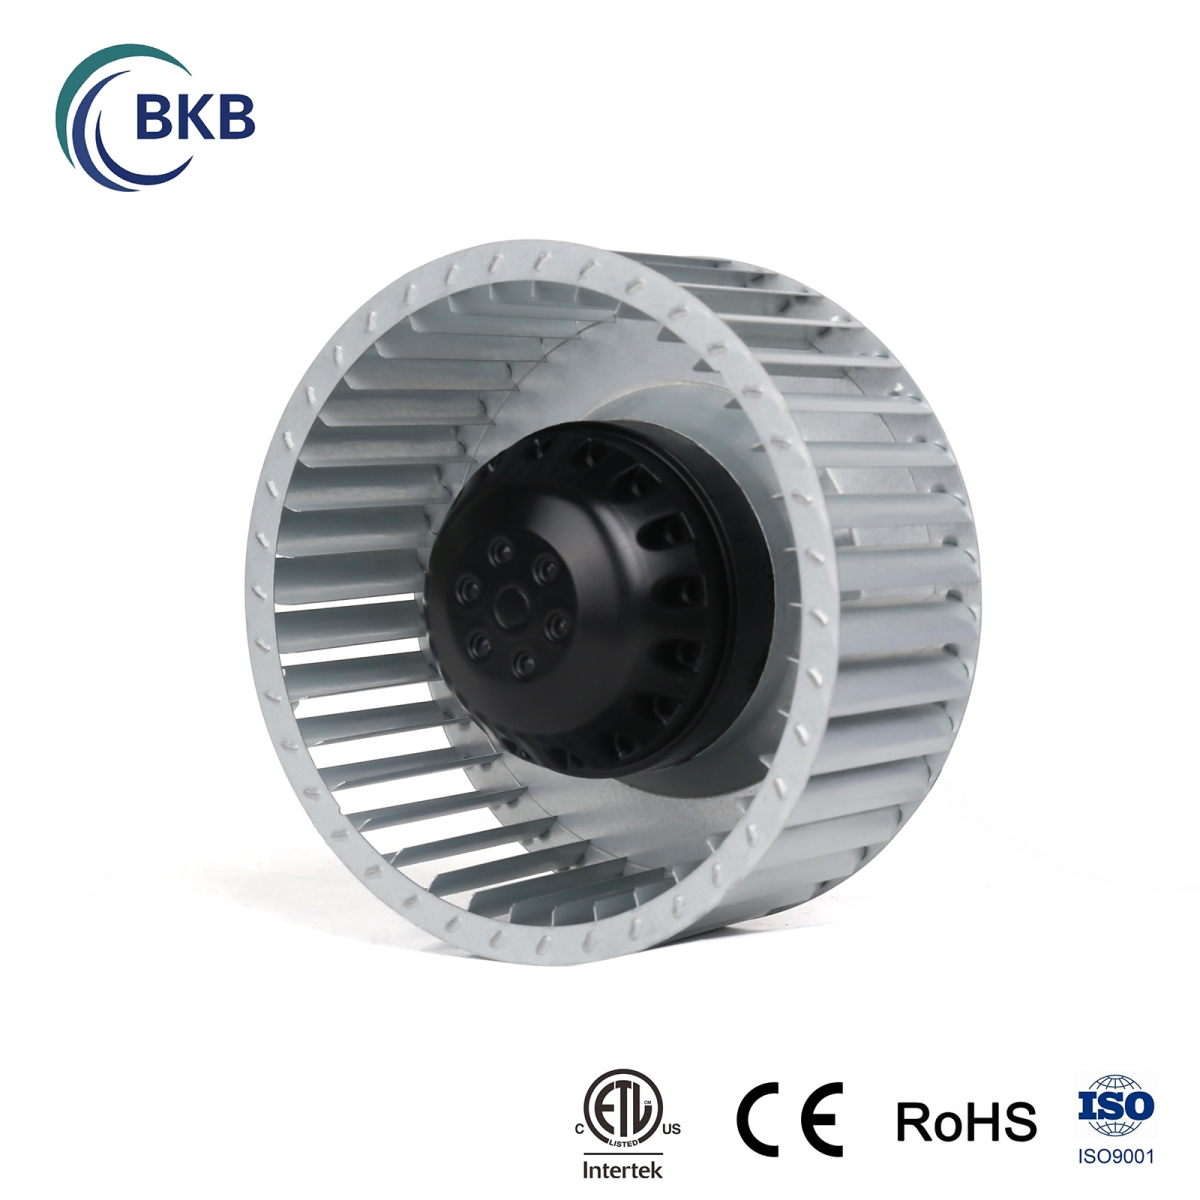 The common differences between the two industrial fans .  — Air Delivering Capacity-SUNLIGHT BLOWER,Centrifugal Fans, Inline Fans,Motors,Backward curved centrifugal fans ,Forward curved centrifugal fans ,inlet fans, EC fans